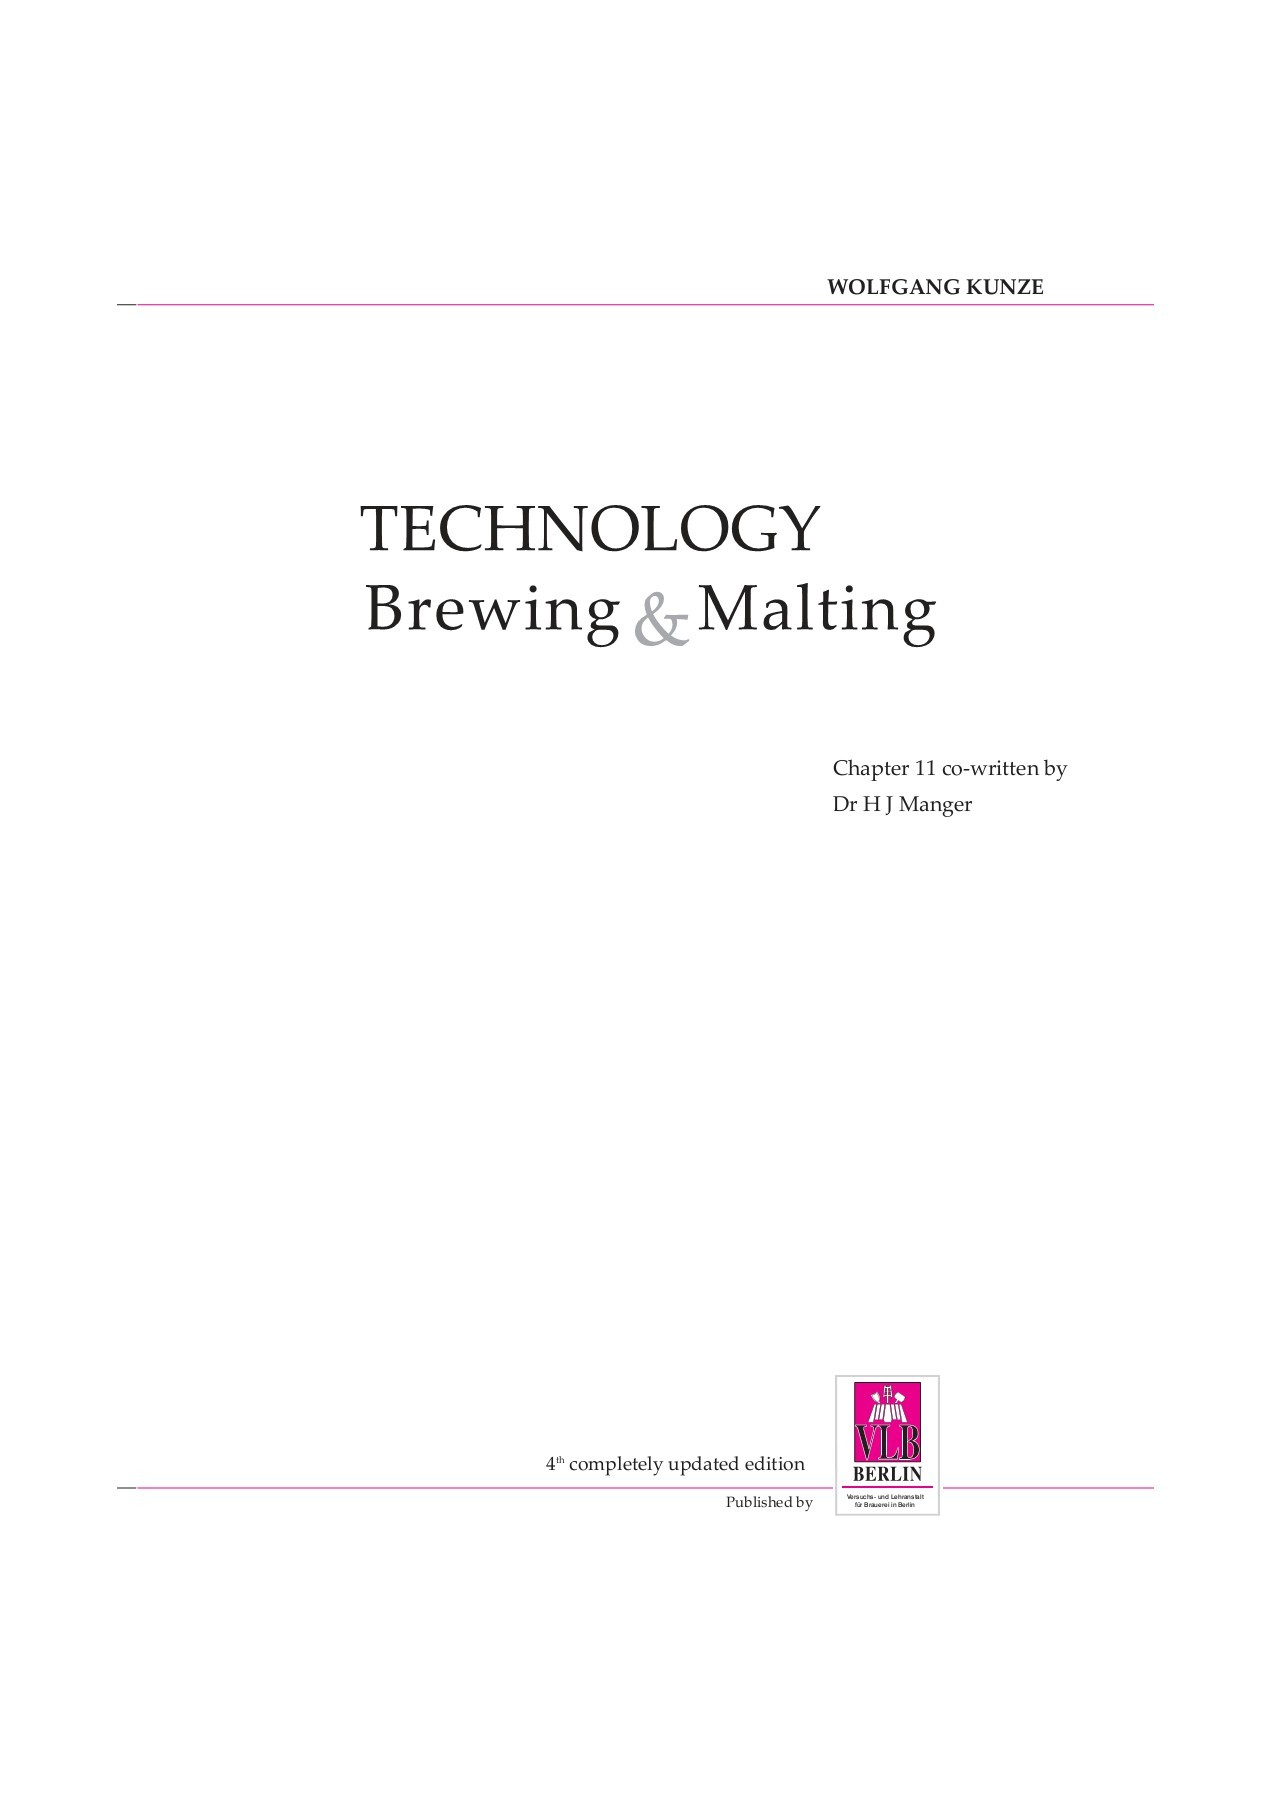 4th edition technology brewing and malting by wolfgang kunze technology